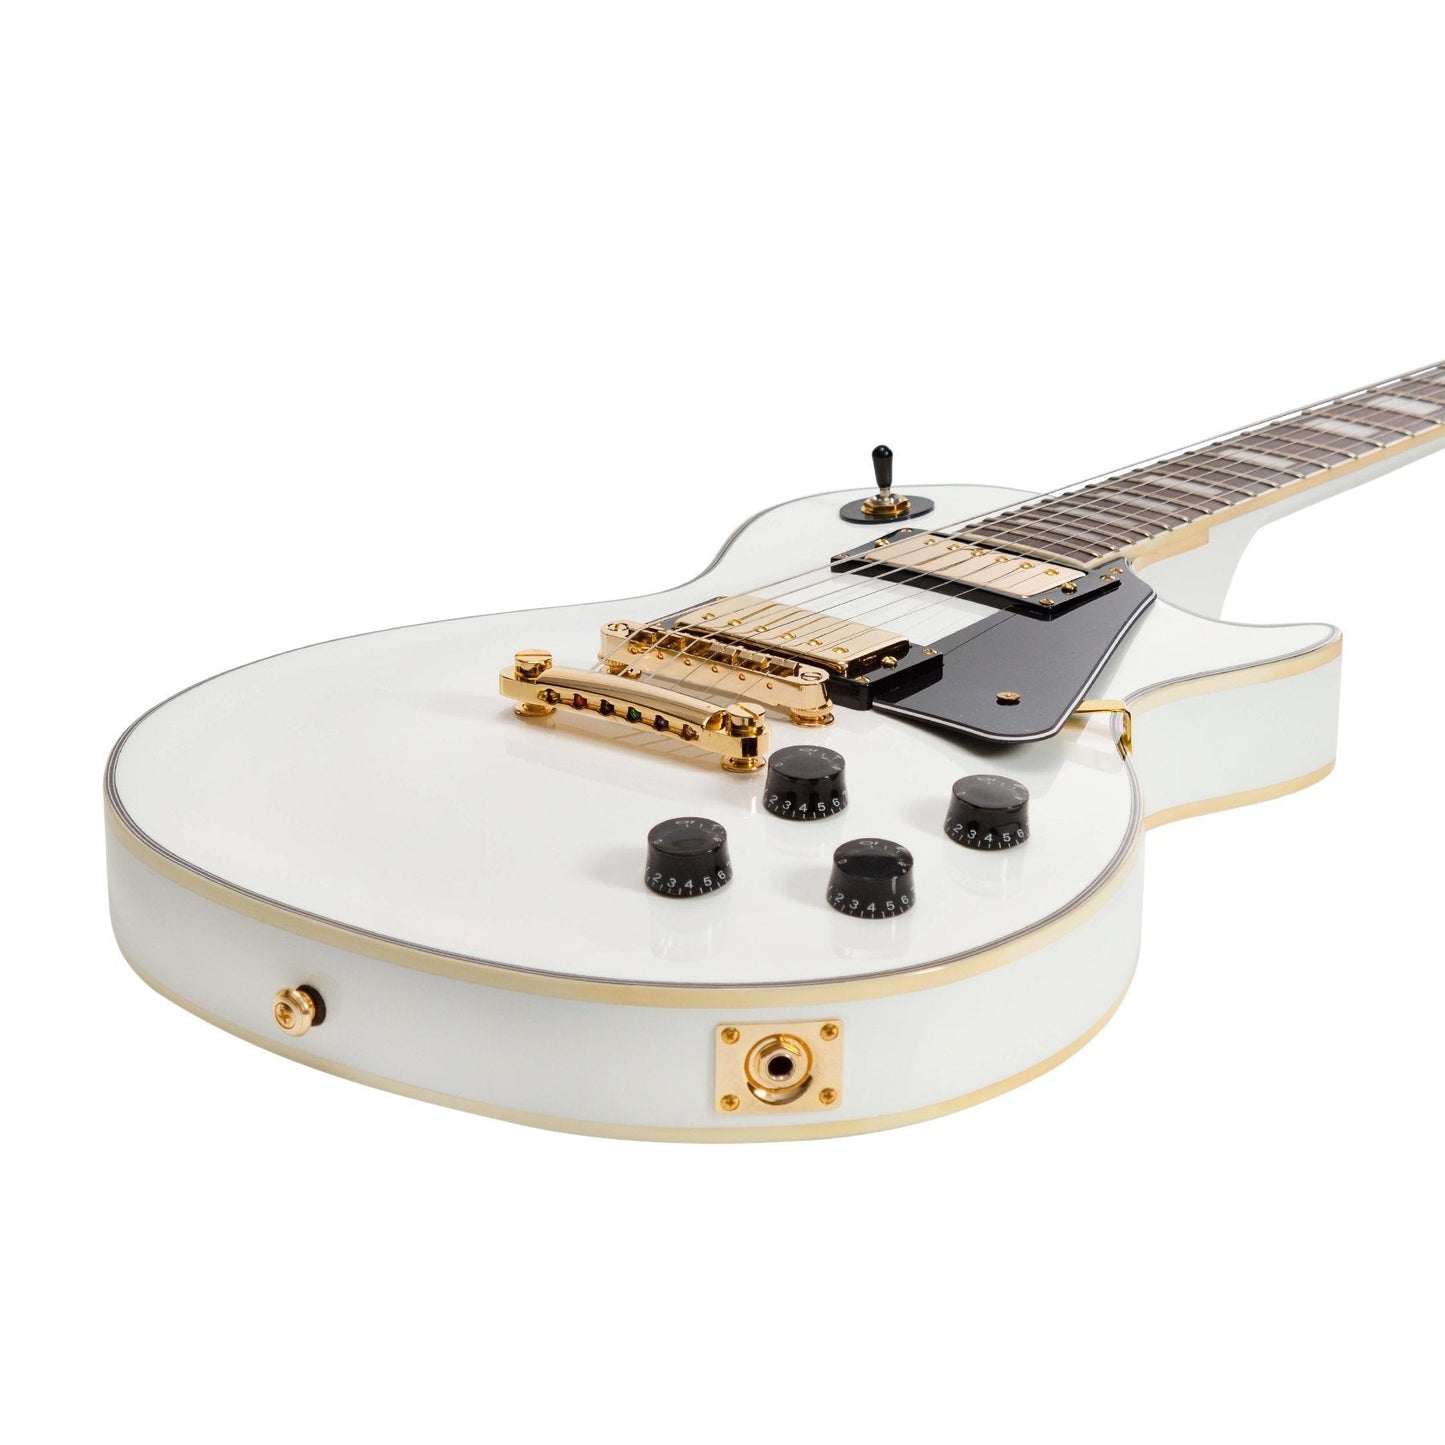 J&D Luthiers LP-Custom Style Electric Guitar (White)